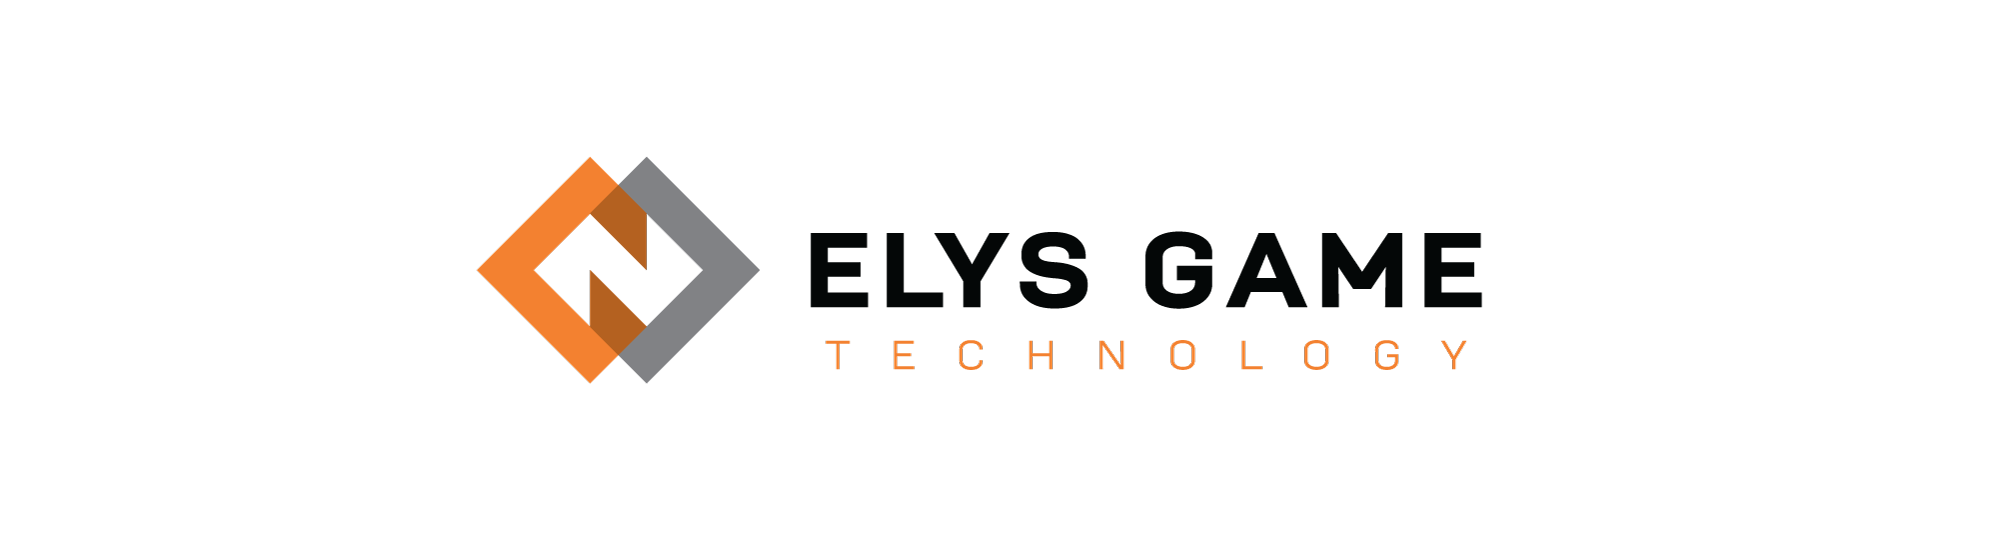 elys-game-technology-introduces-online-and-mobile-sports-betting-brand-for-the-us-market-(wwwsportbet.com)